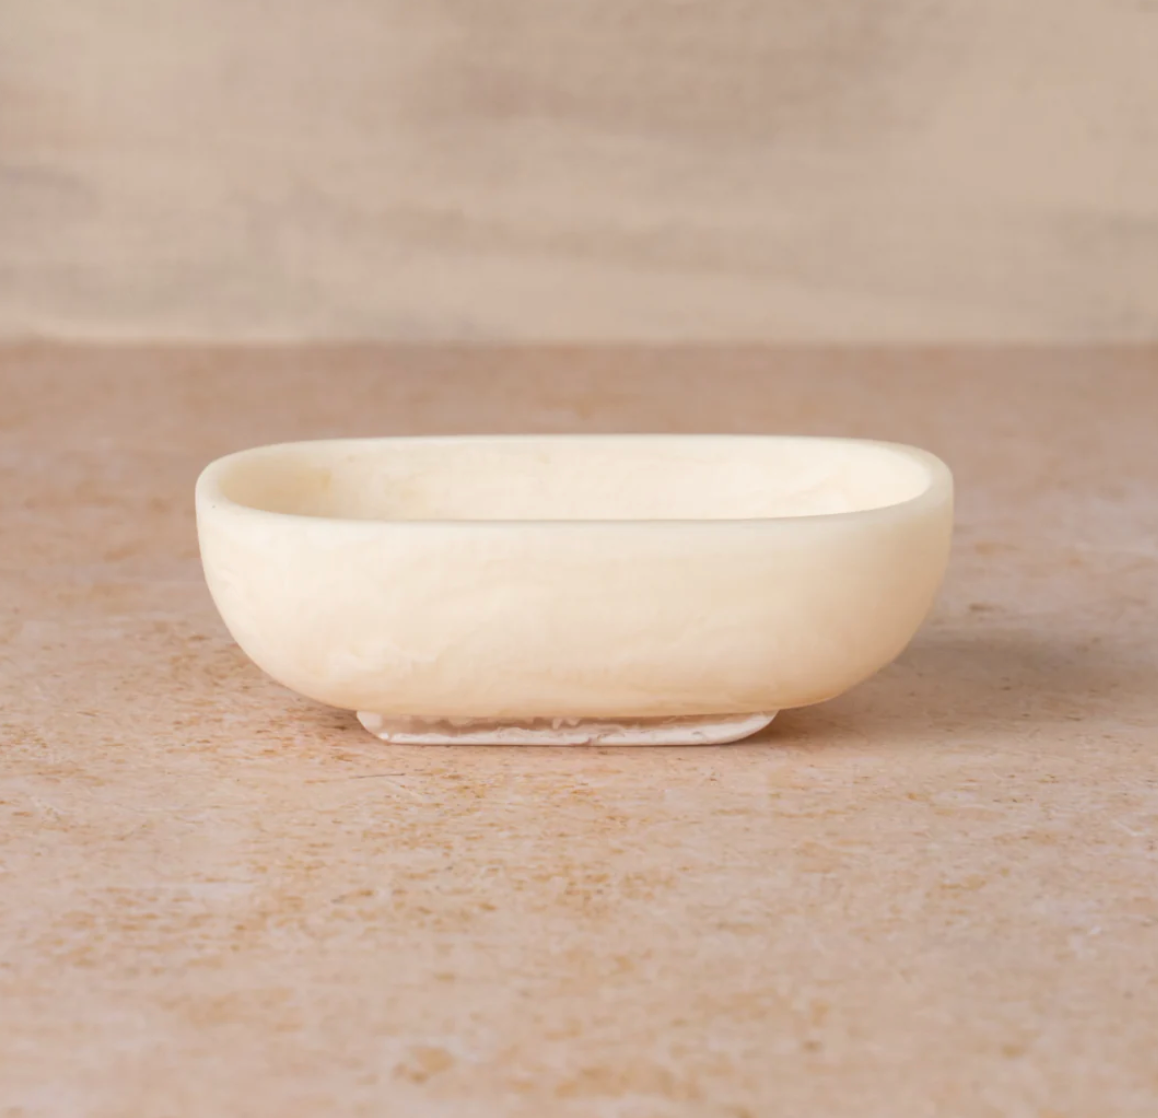 Flow Resin Soap Dish | Marshmallow The Marshmallow Flow Resin Soap Dish is distinctive and organic with its curved lines and marble finish.  Each soap dish is handmade and no two patterns are the same.  